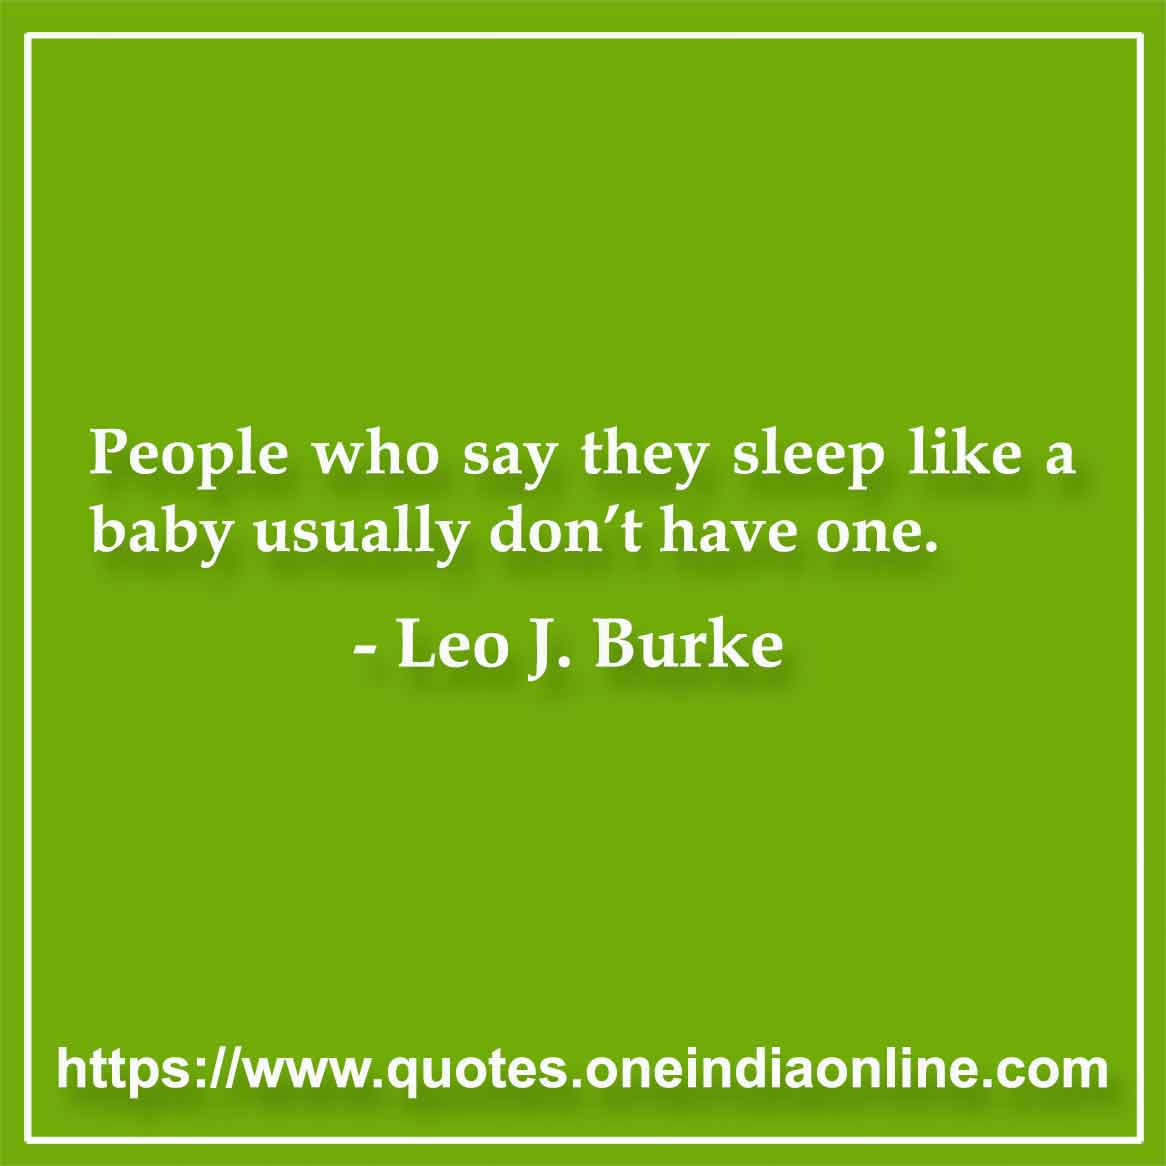 People who say they sleep like a baby usually don’t have one.

- Leo J. Burke Quotes